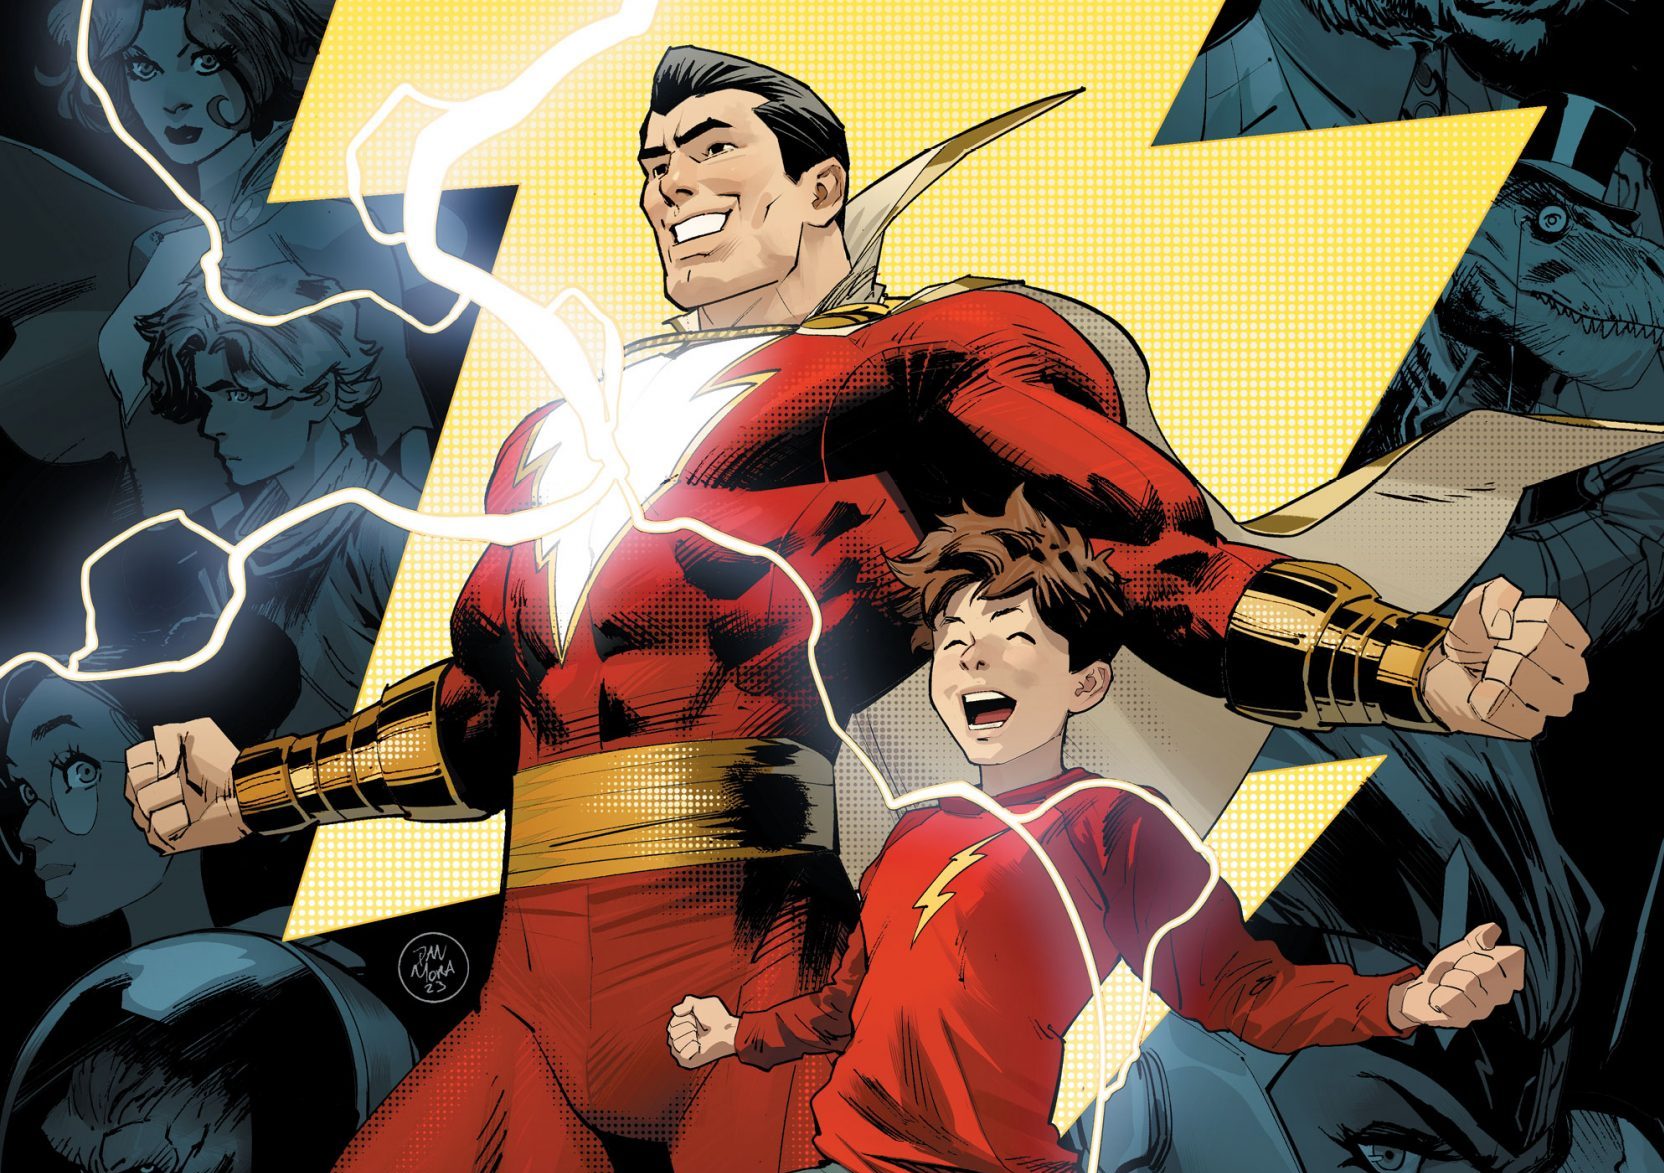 ‘Shazam!’ #5 explores the shades of pride and humility